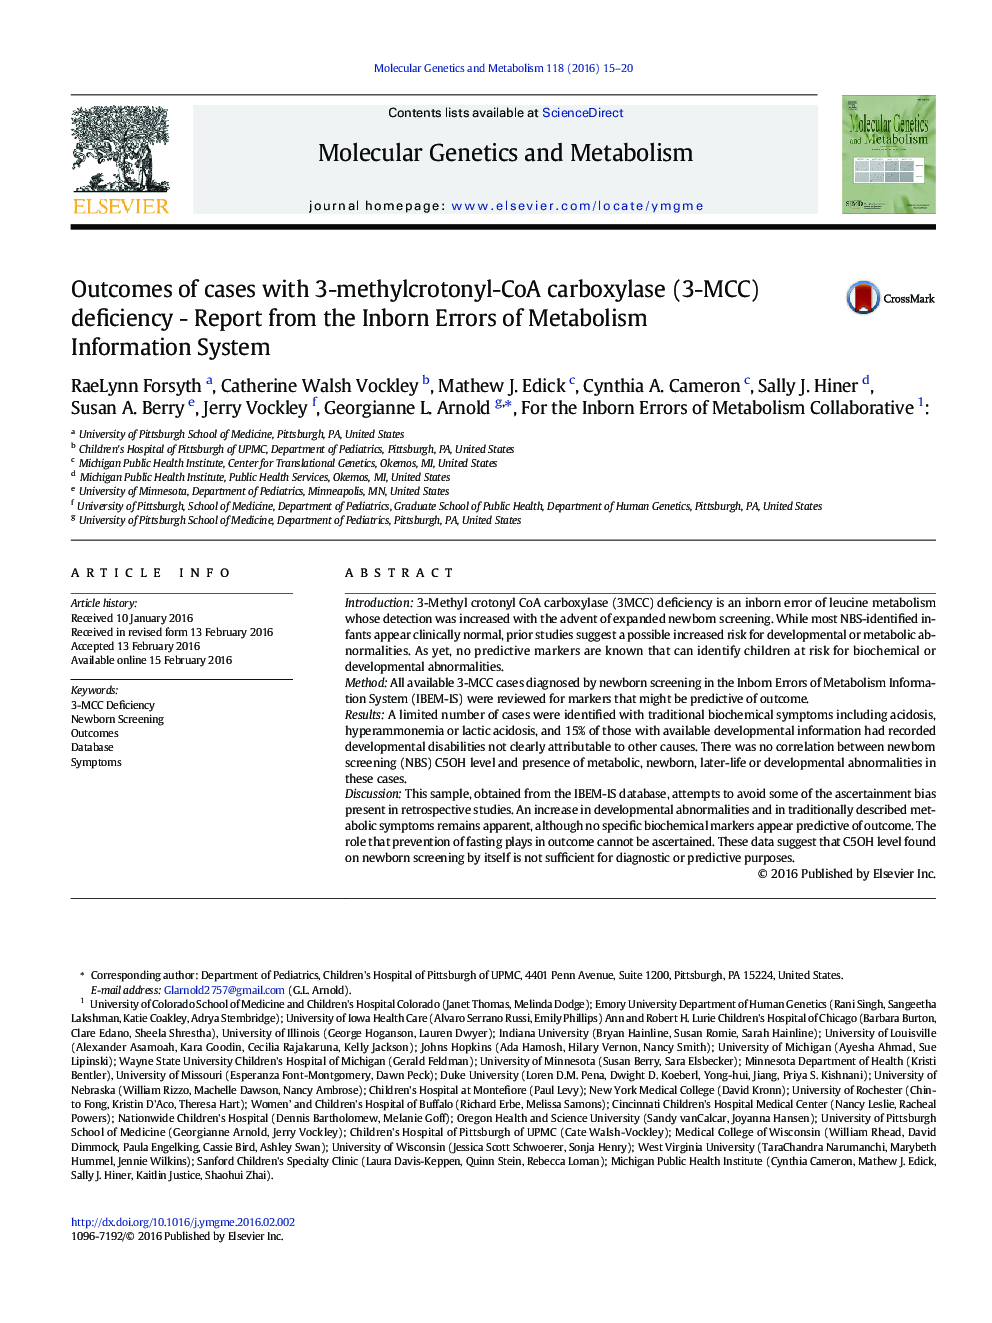 Outcomes of cases with 3-methylcrotonyl-CoA carboxylase (3-MCC) deficiency - Report from the Inborn Errors of Metabolism Information System